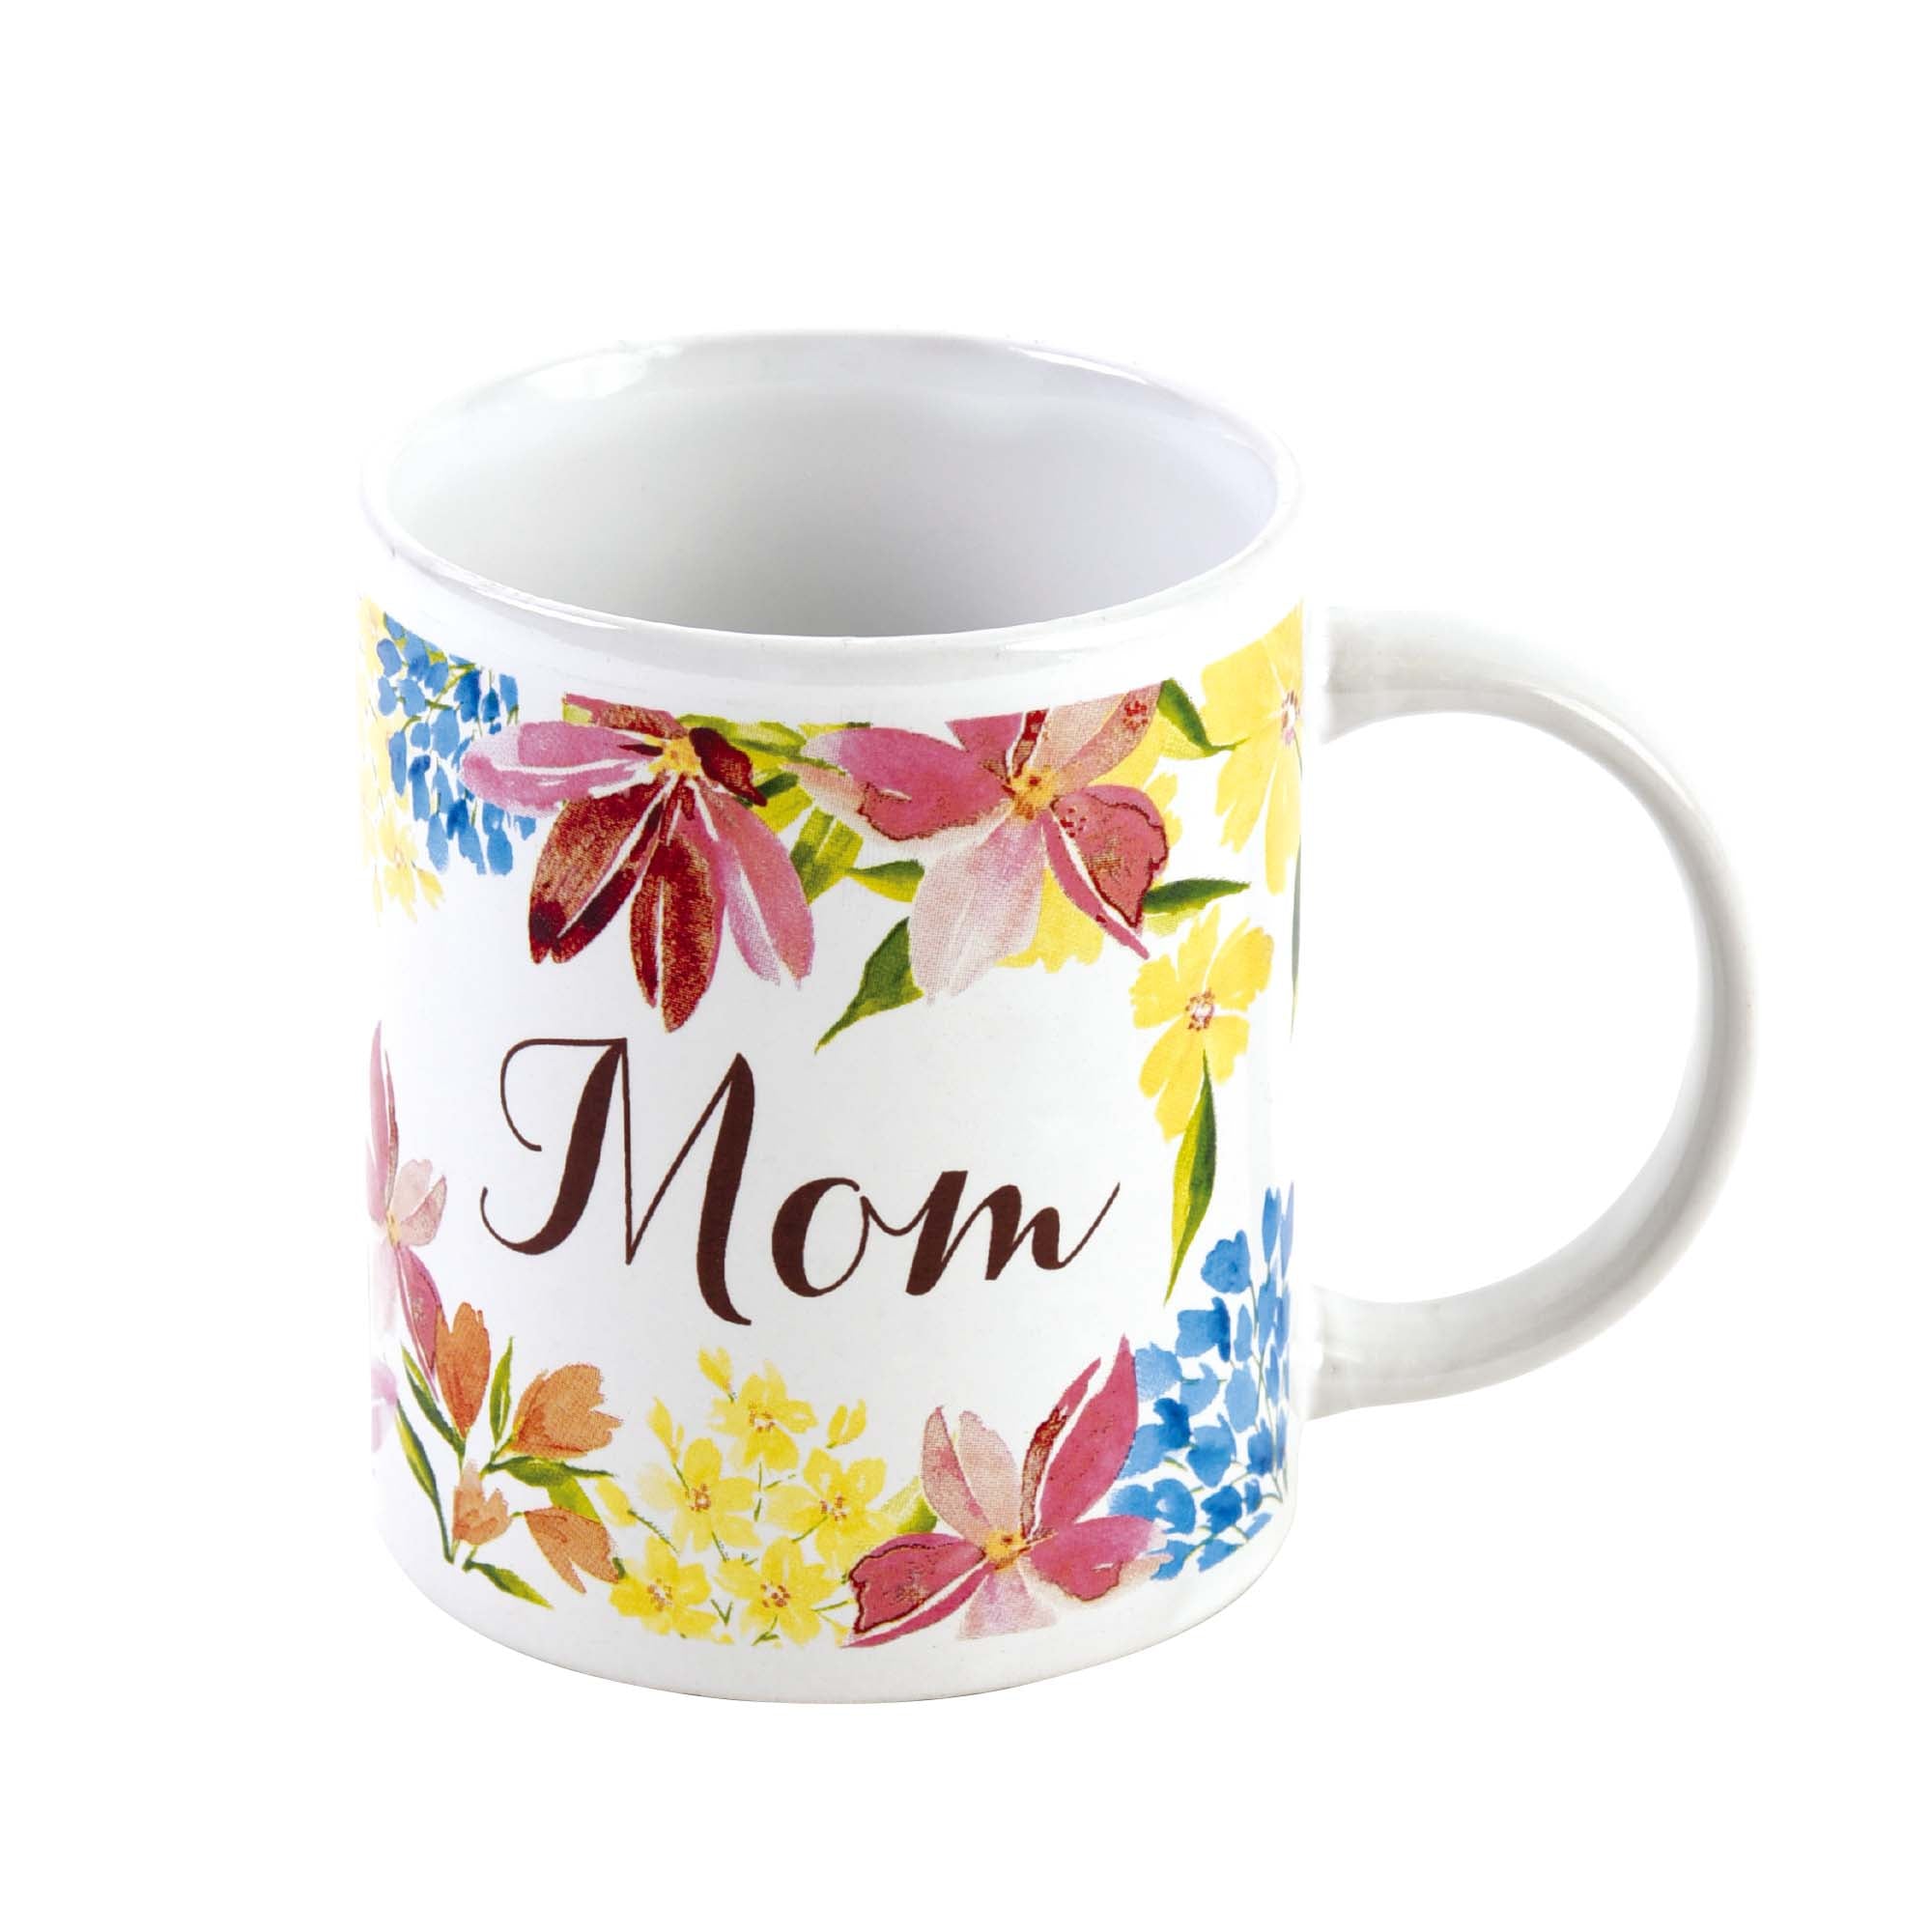 Best Mom Ever Mug for Mother's Day, Gifts for Mom Birthday, New